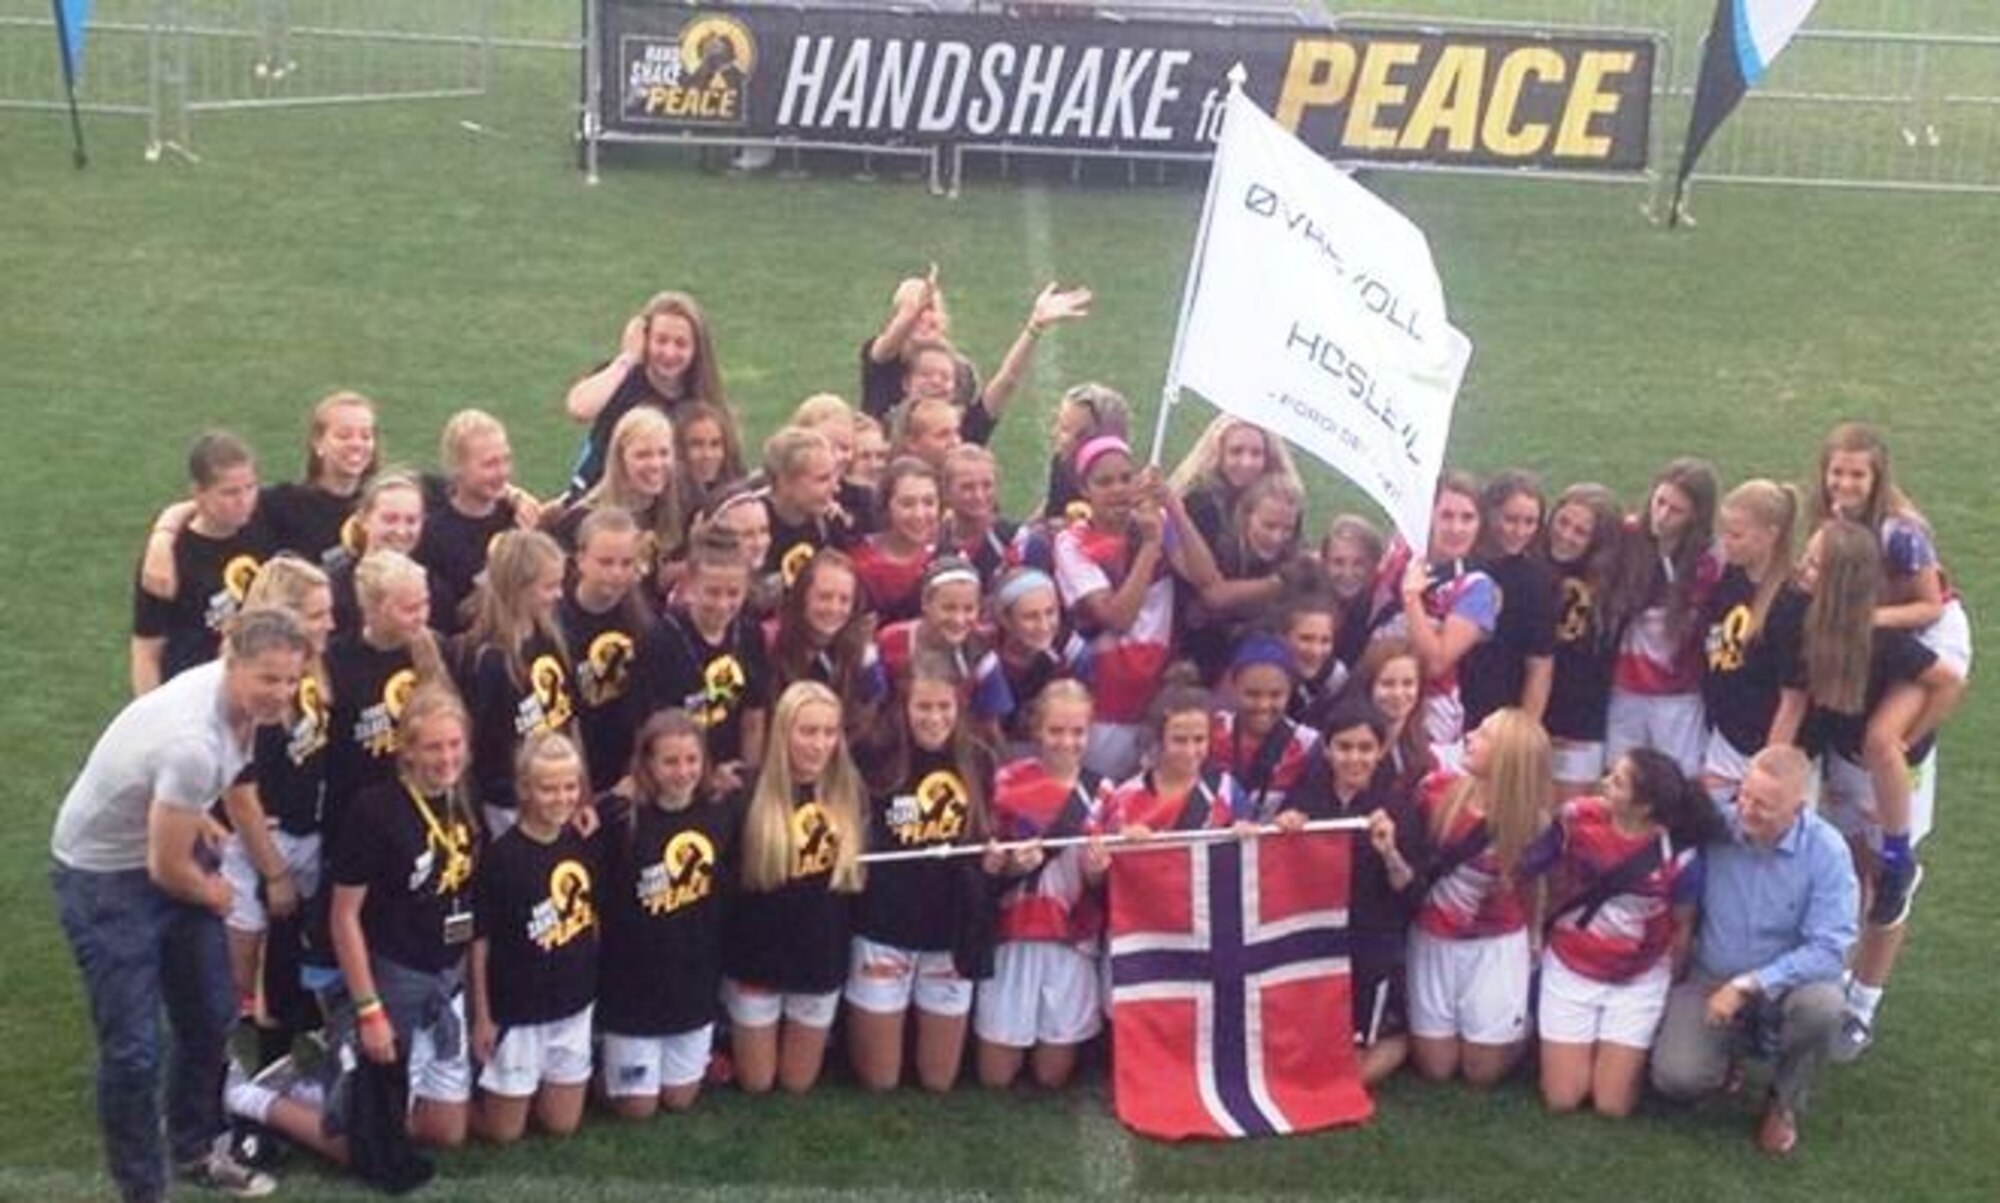 Team Fiera from Omaha, Nebraska, and Team Oslo’s Ovrevall-Hosle from Norway, pose for a group photo at the largest youth soccer tournament in the Western Hemisphere called Schwan’s USA Cup in Blaine, Minnesota. The teams were selected as ambassadors for the new Handshake for Peace program. (U.S. Air Force courtesy photo)